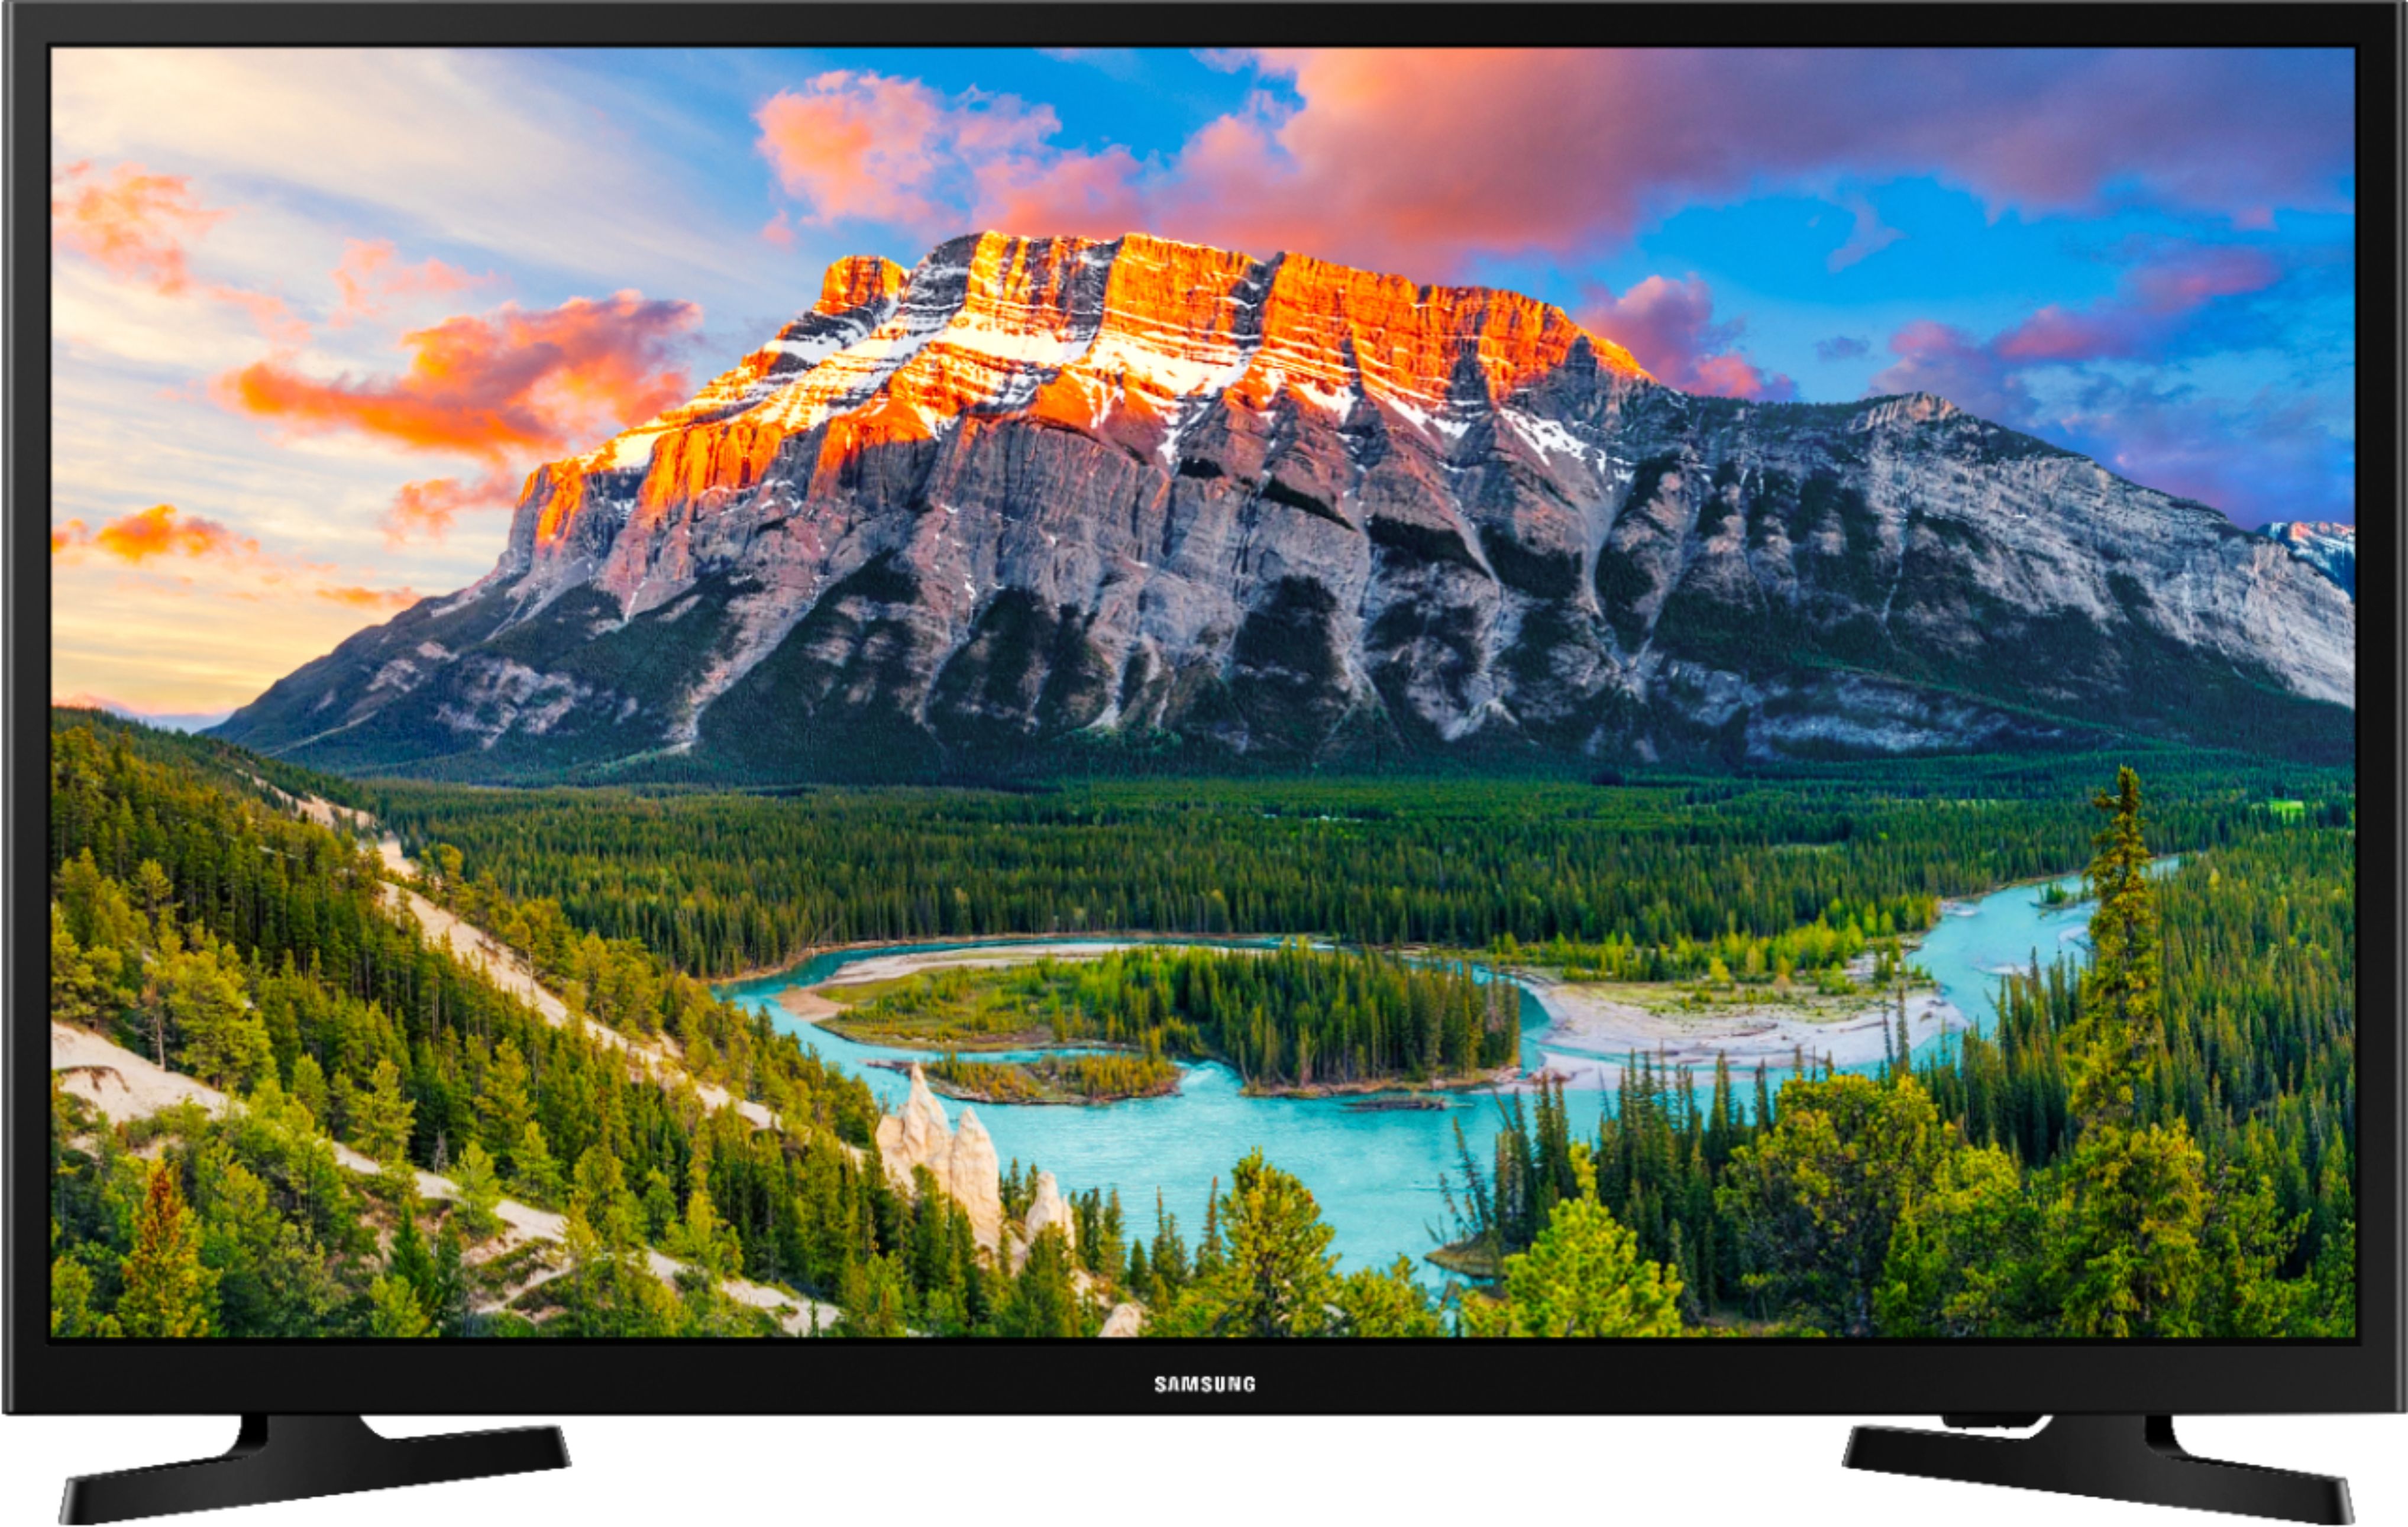 Unlock The Secret To Powering On A Samsung Smart TV Without A Remote!